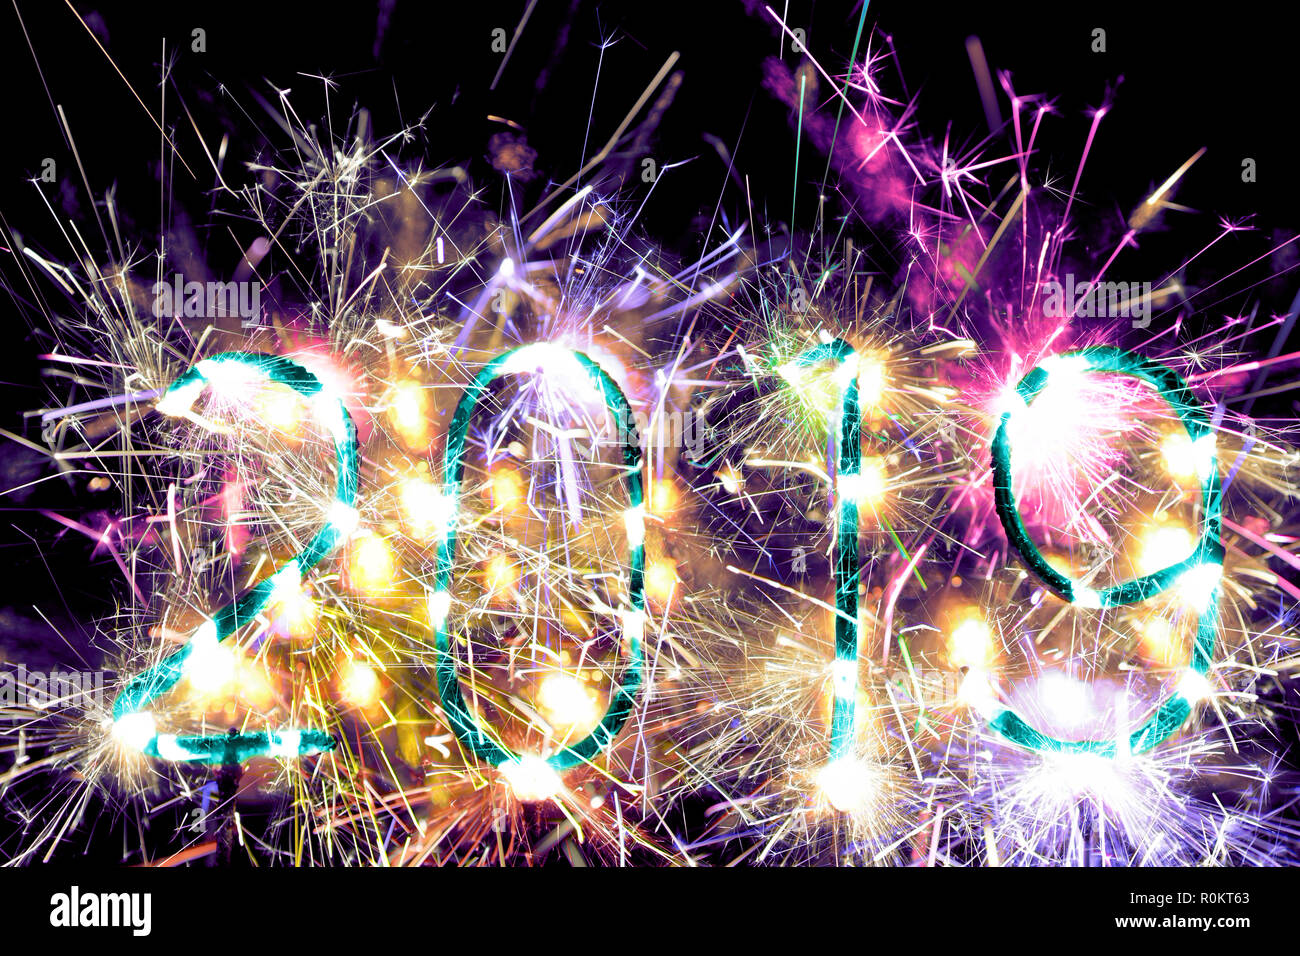 New Year 2019. Sparkler fireworks number 2019 burning. Vibrant, colorful full of energy. Copy space at top. Stock Photo